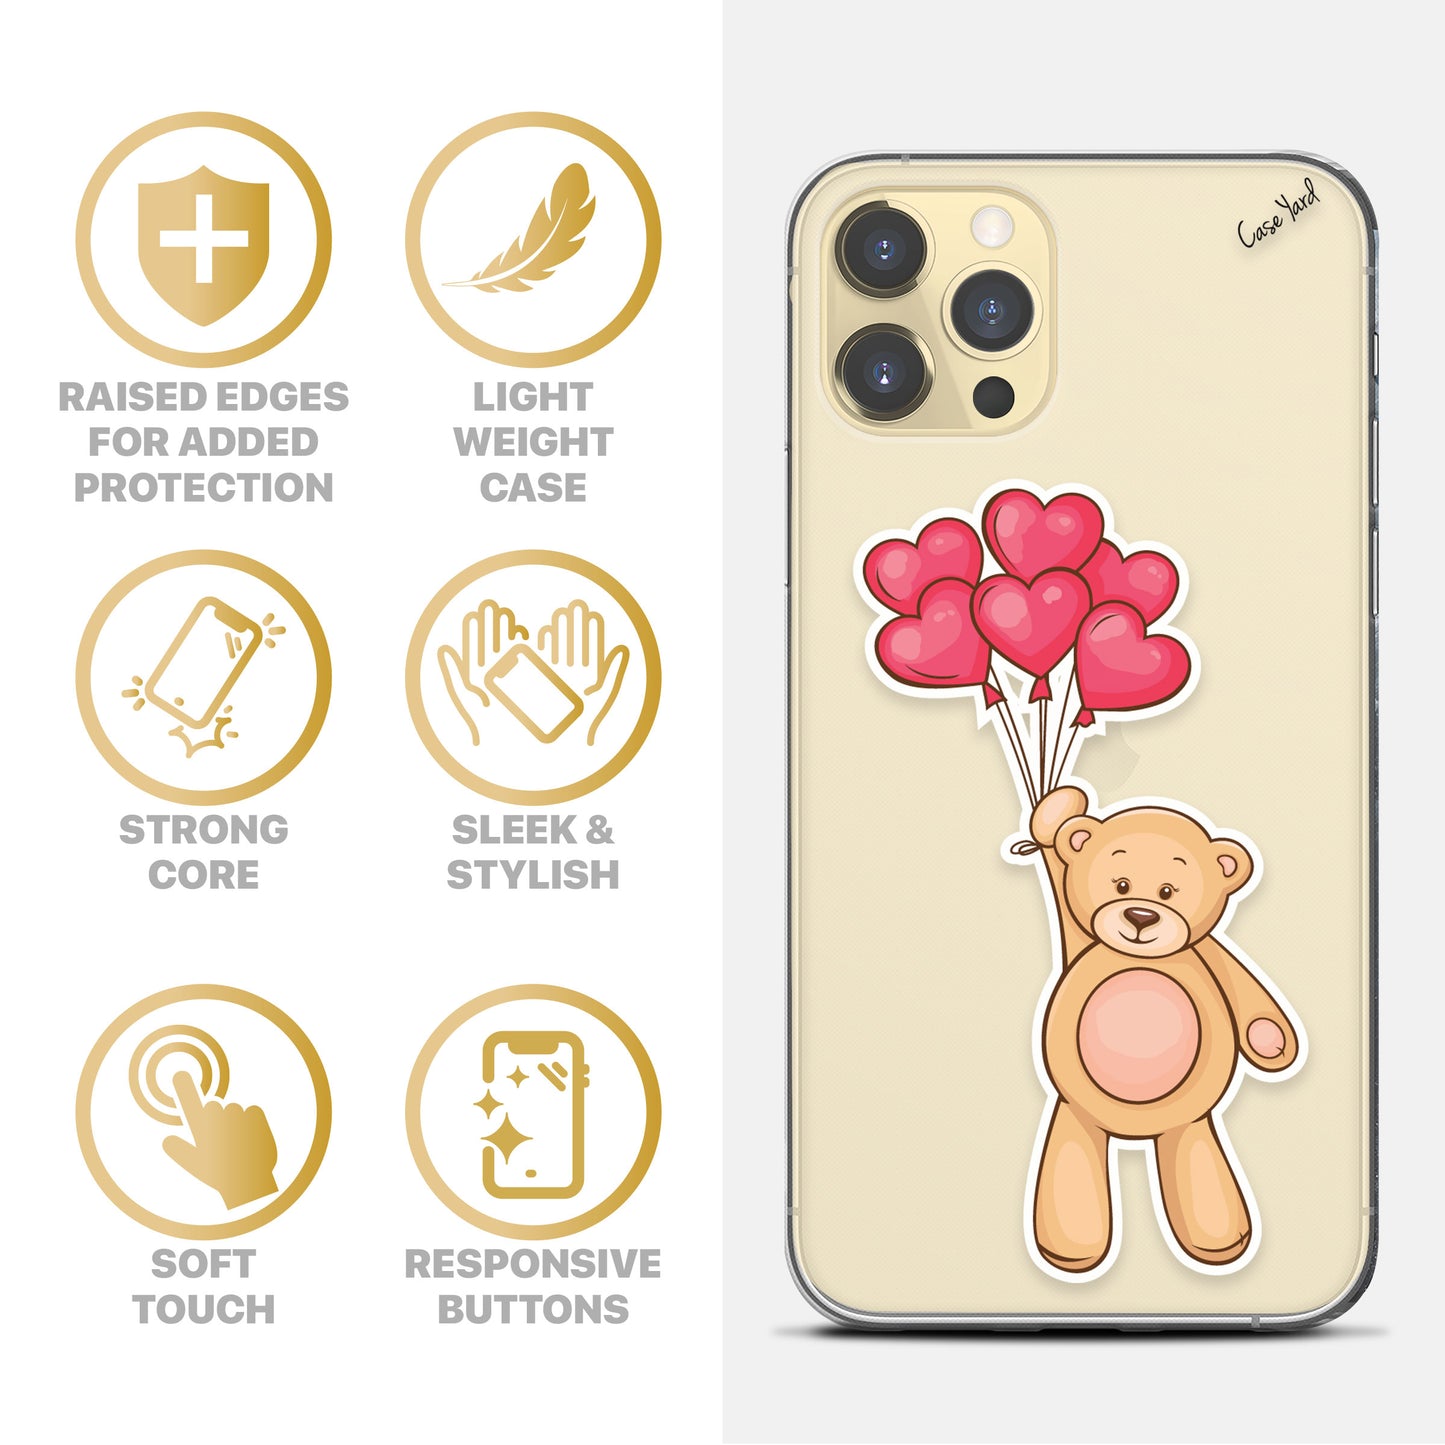 TPU Case Clear case with (Balloons and Teddy) Design for iPhone & Samsung Phones